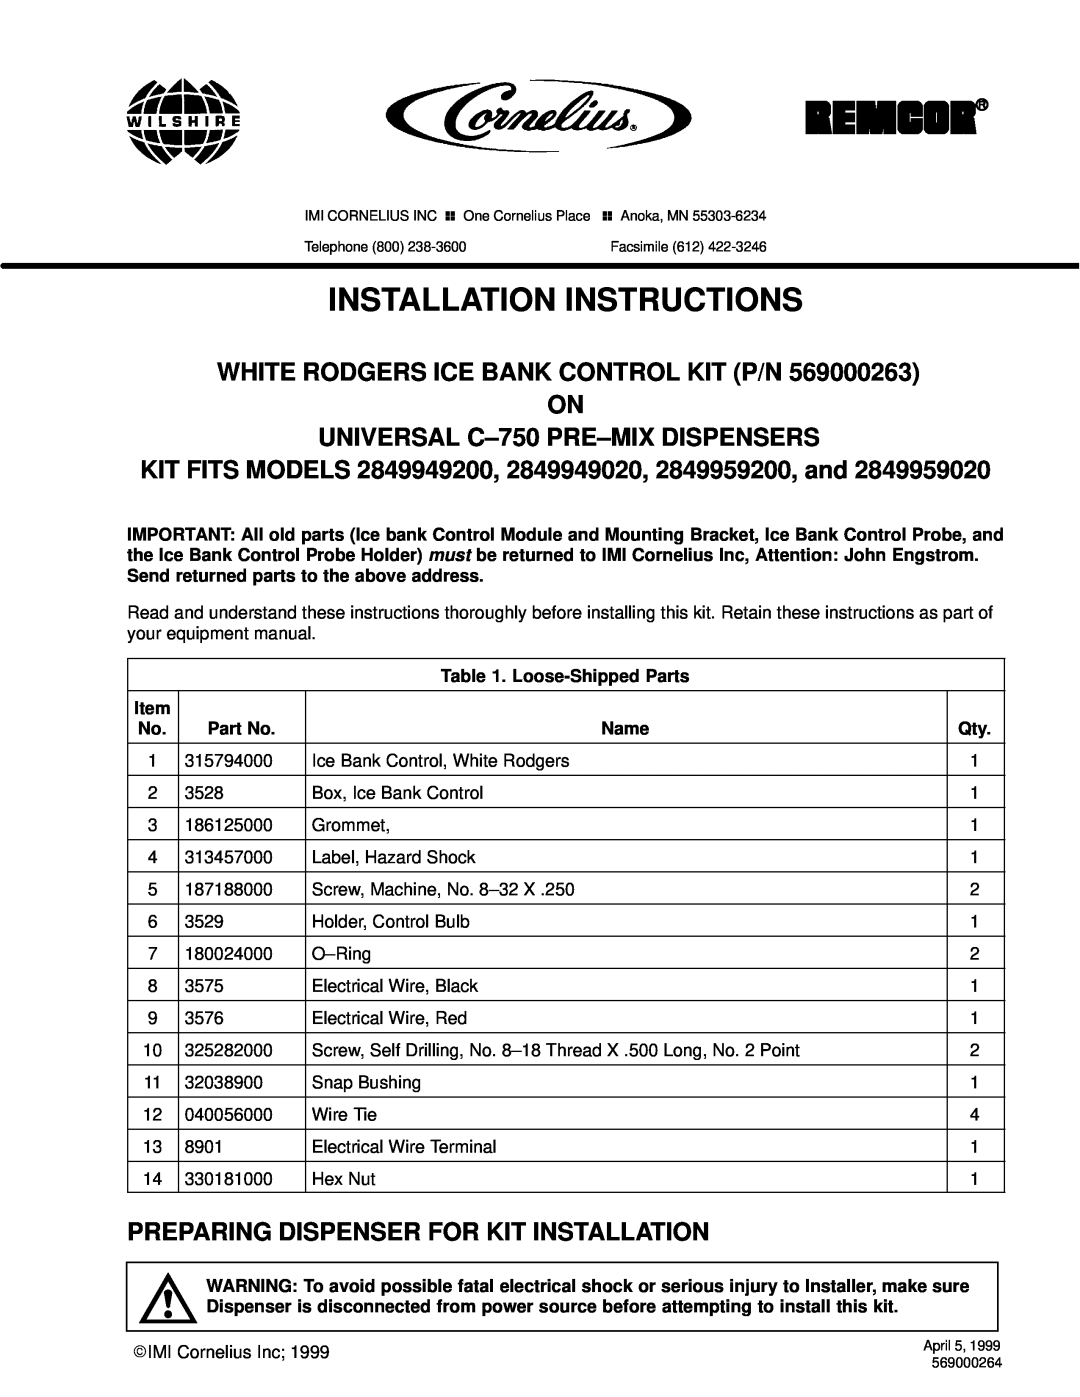 Cornelius 2849949200 installation instructions White Rodgers Ice Bank Control Kit P/N On, Installation Instructions 